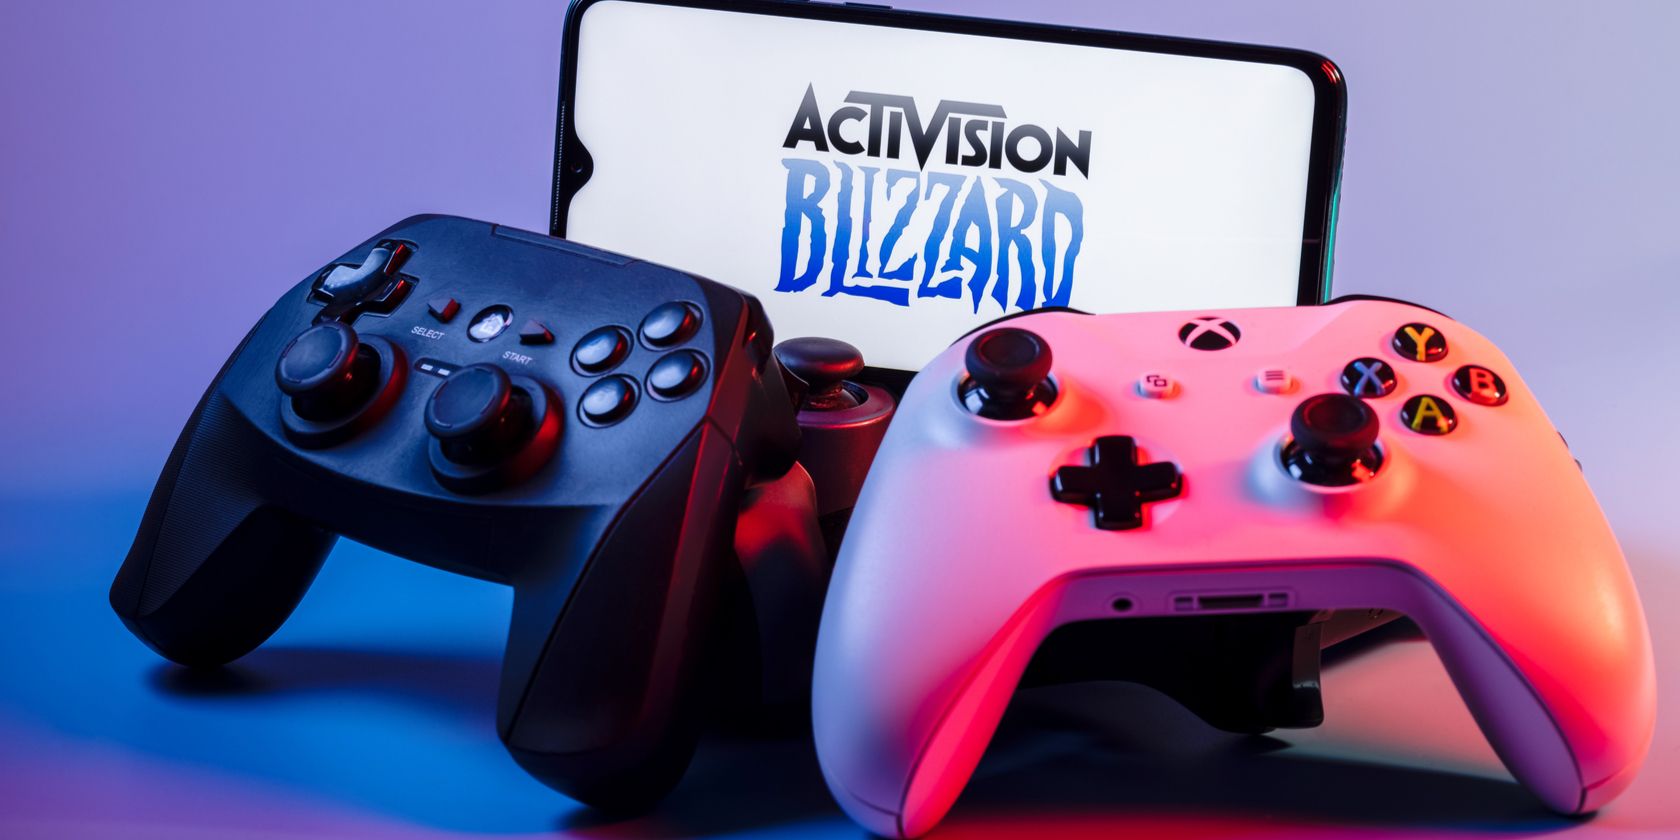 Two controllers next to a phone displaying Activision Blizzard's logo